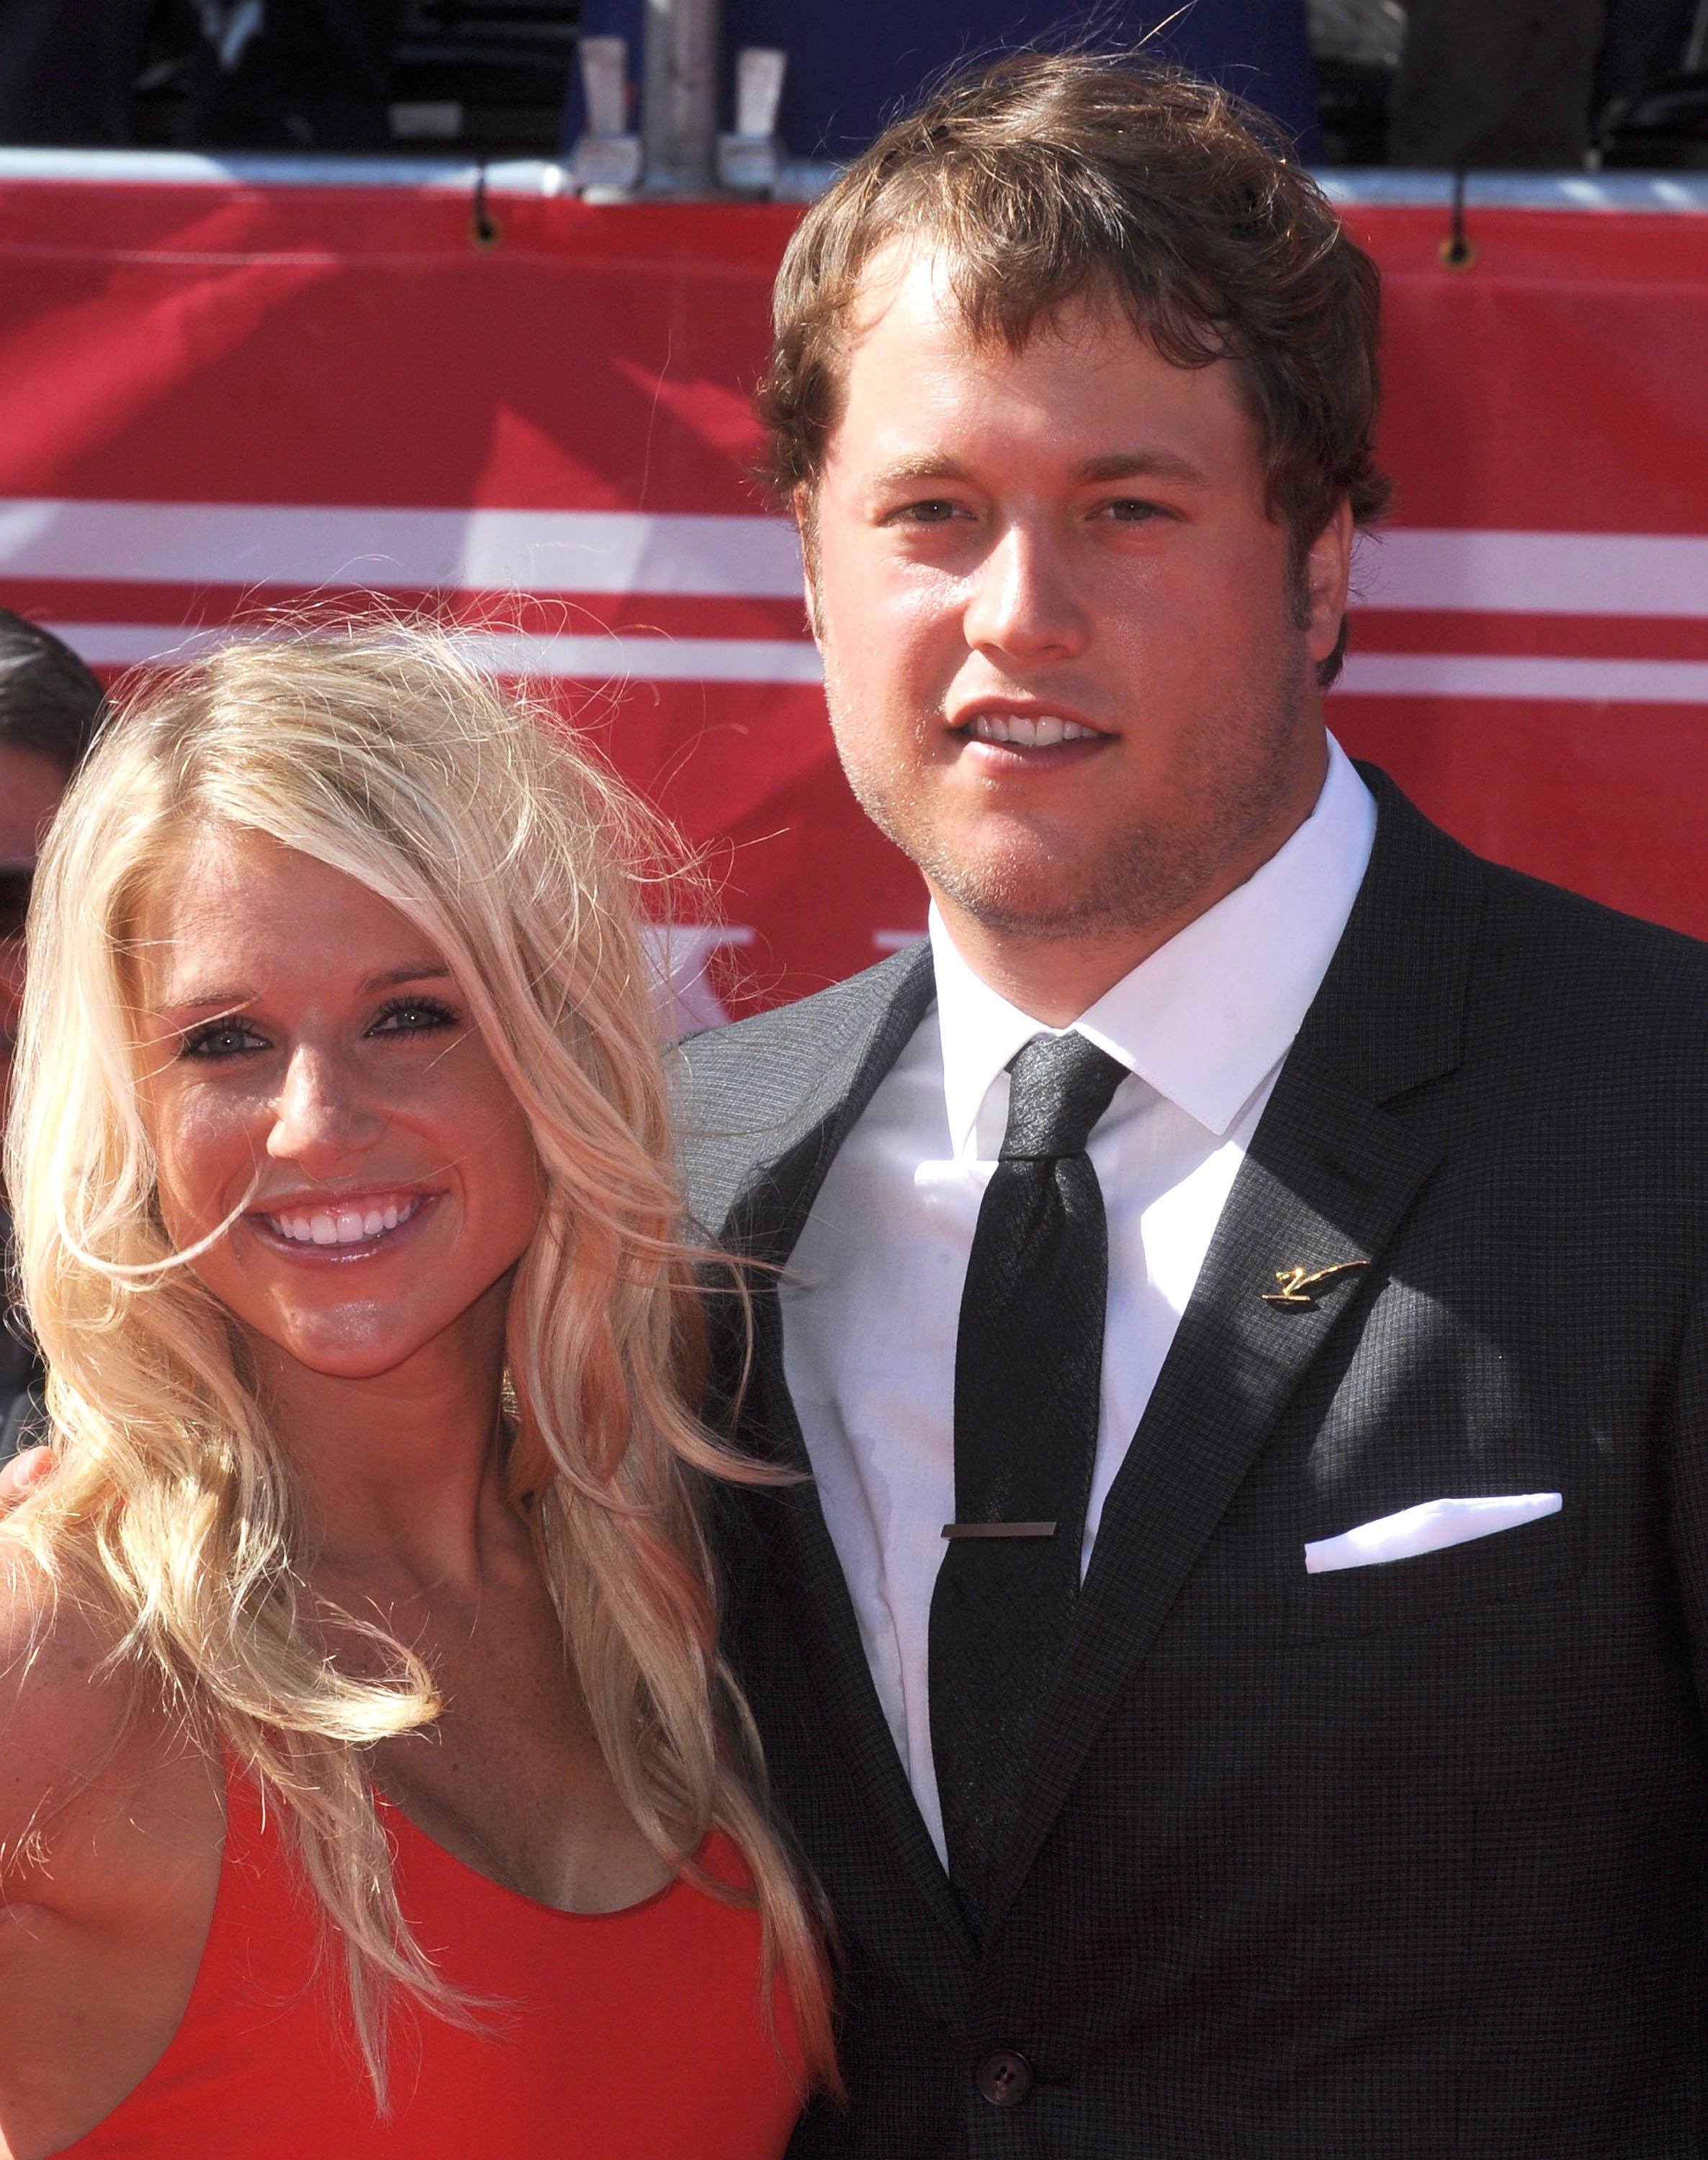 Matthew Stafford and then-Kelly Hall at ESPYS